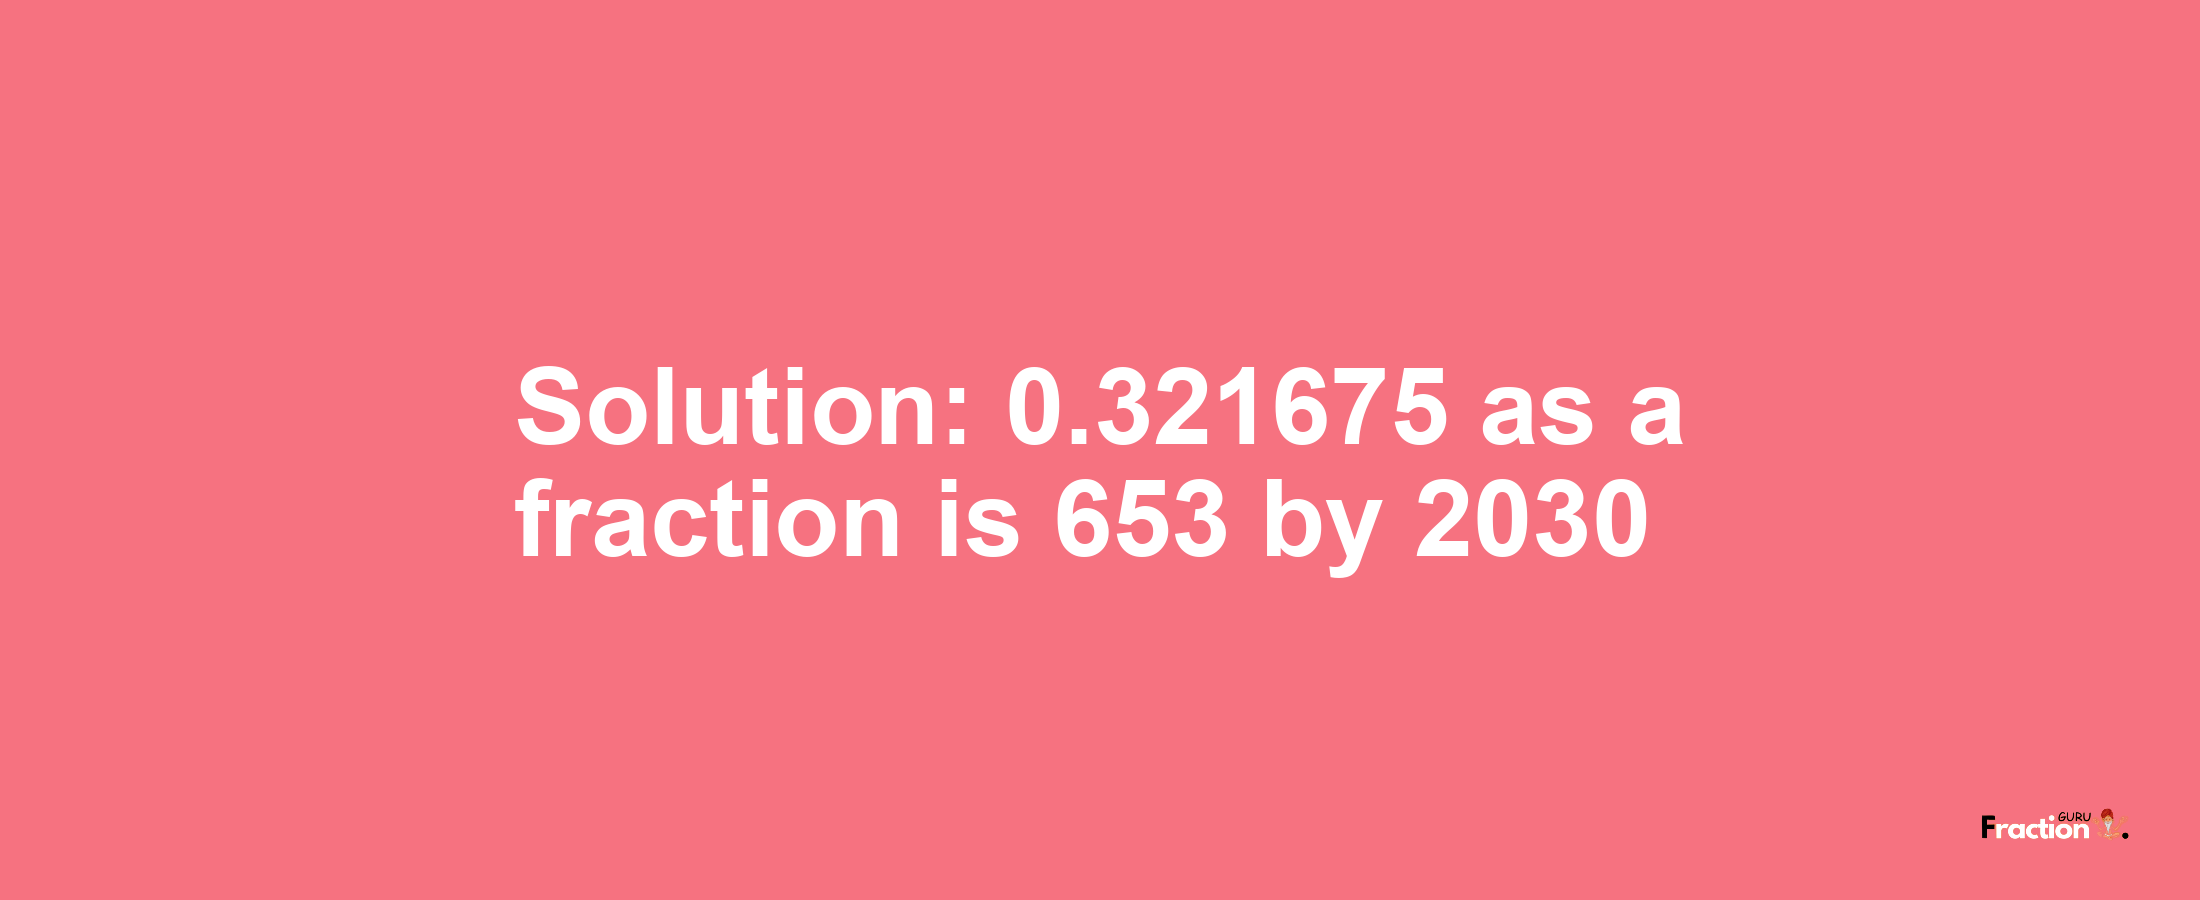 Solution:0.321675 as a fraction is 653/2030